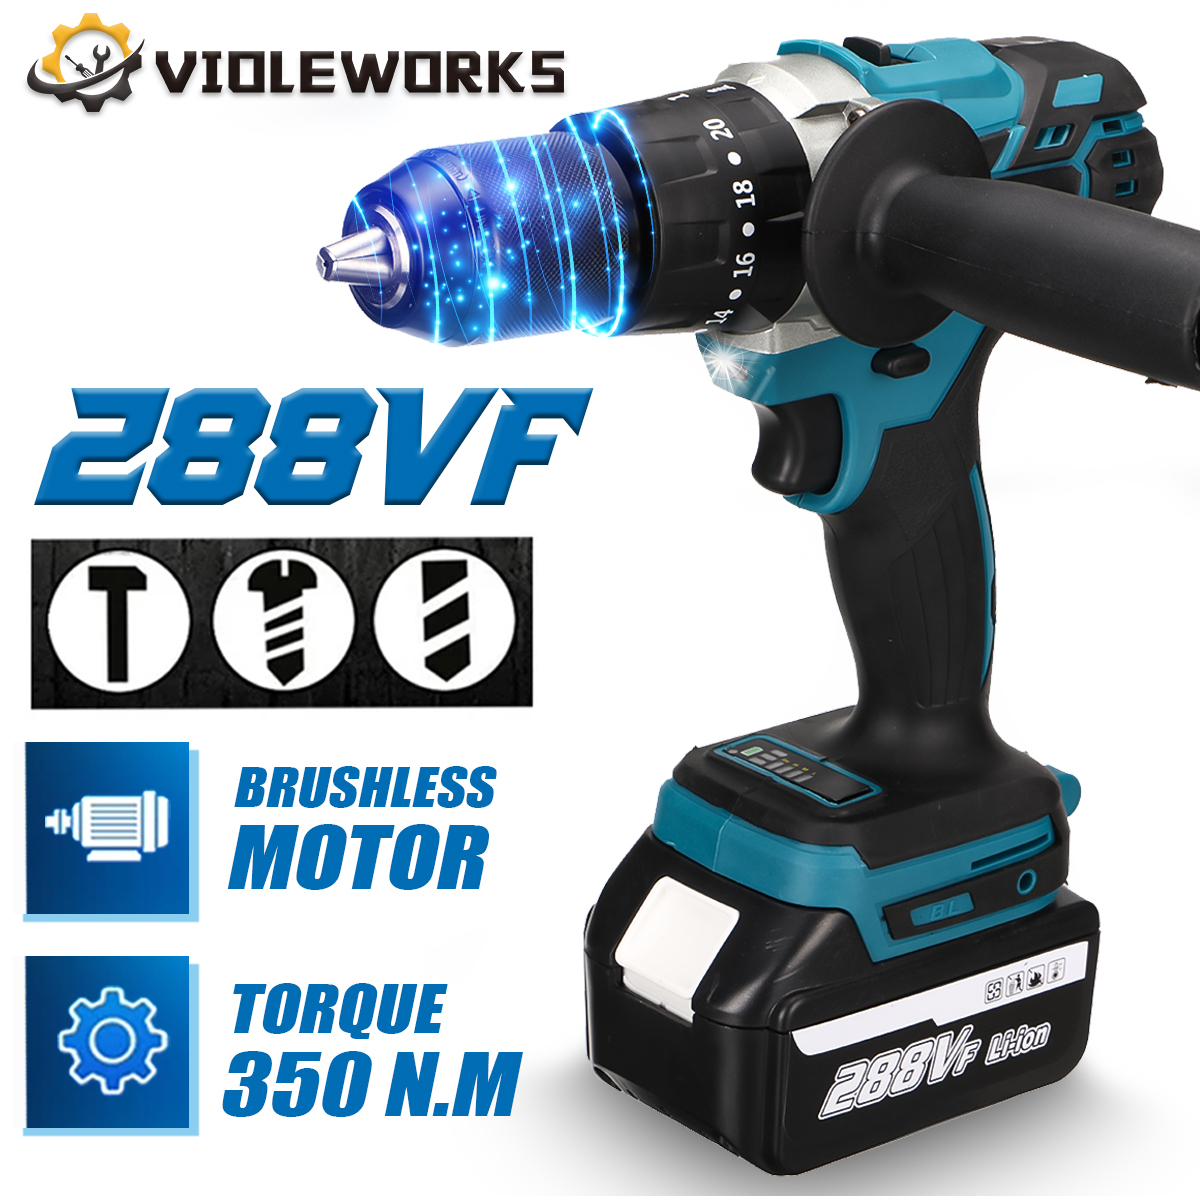 VIOLEWORKS-3-IN-1-288VF-Cordless-Brushless-Hammer-Drill-Speed-Regulated-Electric-Screwdriver-Impact--1852902-2